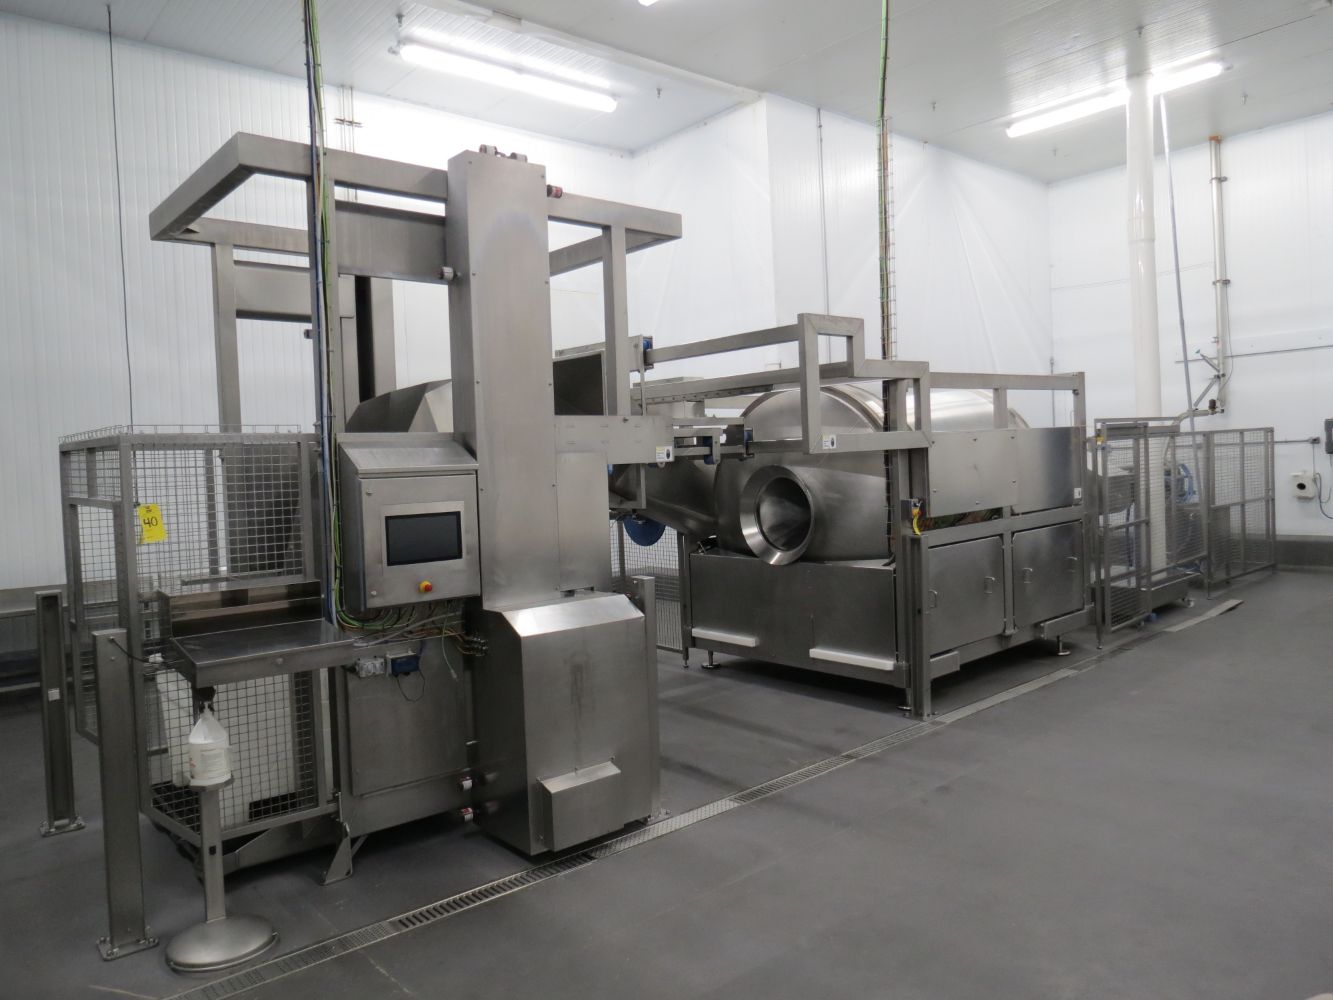 Public Auction - Complete Food Production Facility.  Cadence Gourmet, LLC  By Order of Assignee for the Benefit of Creditors